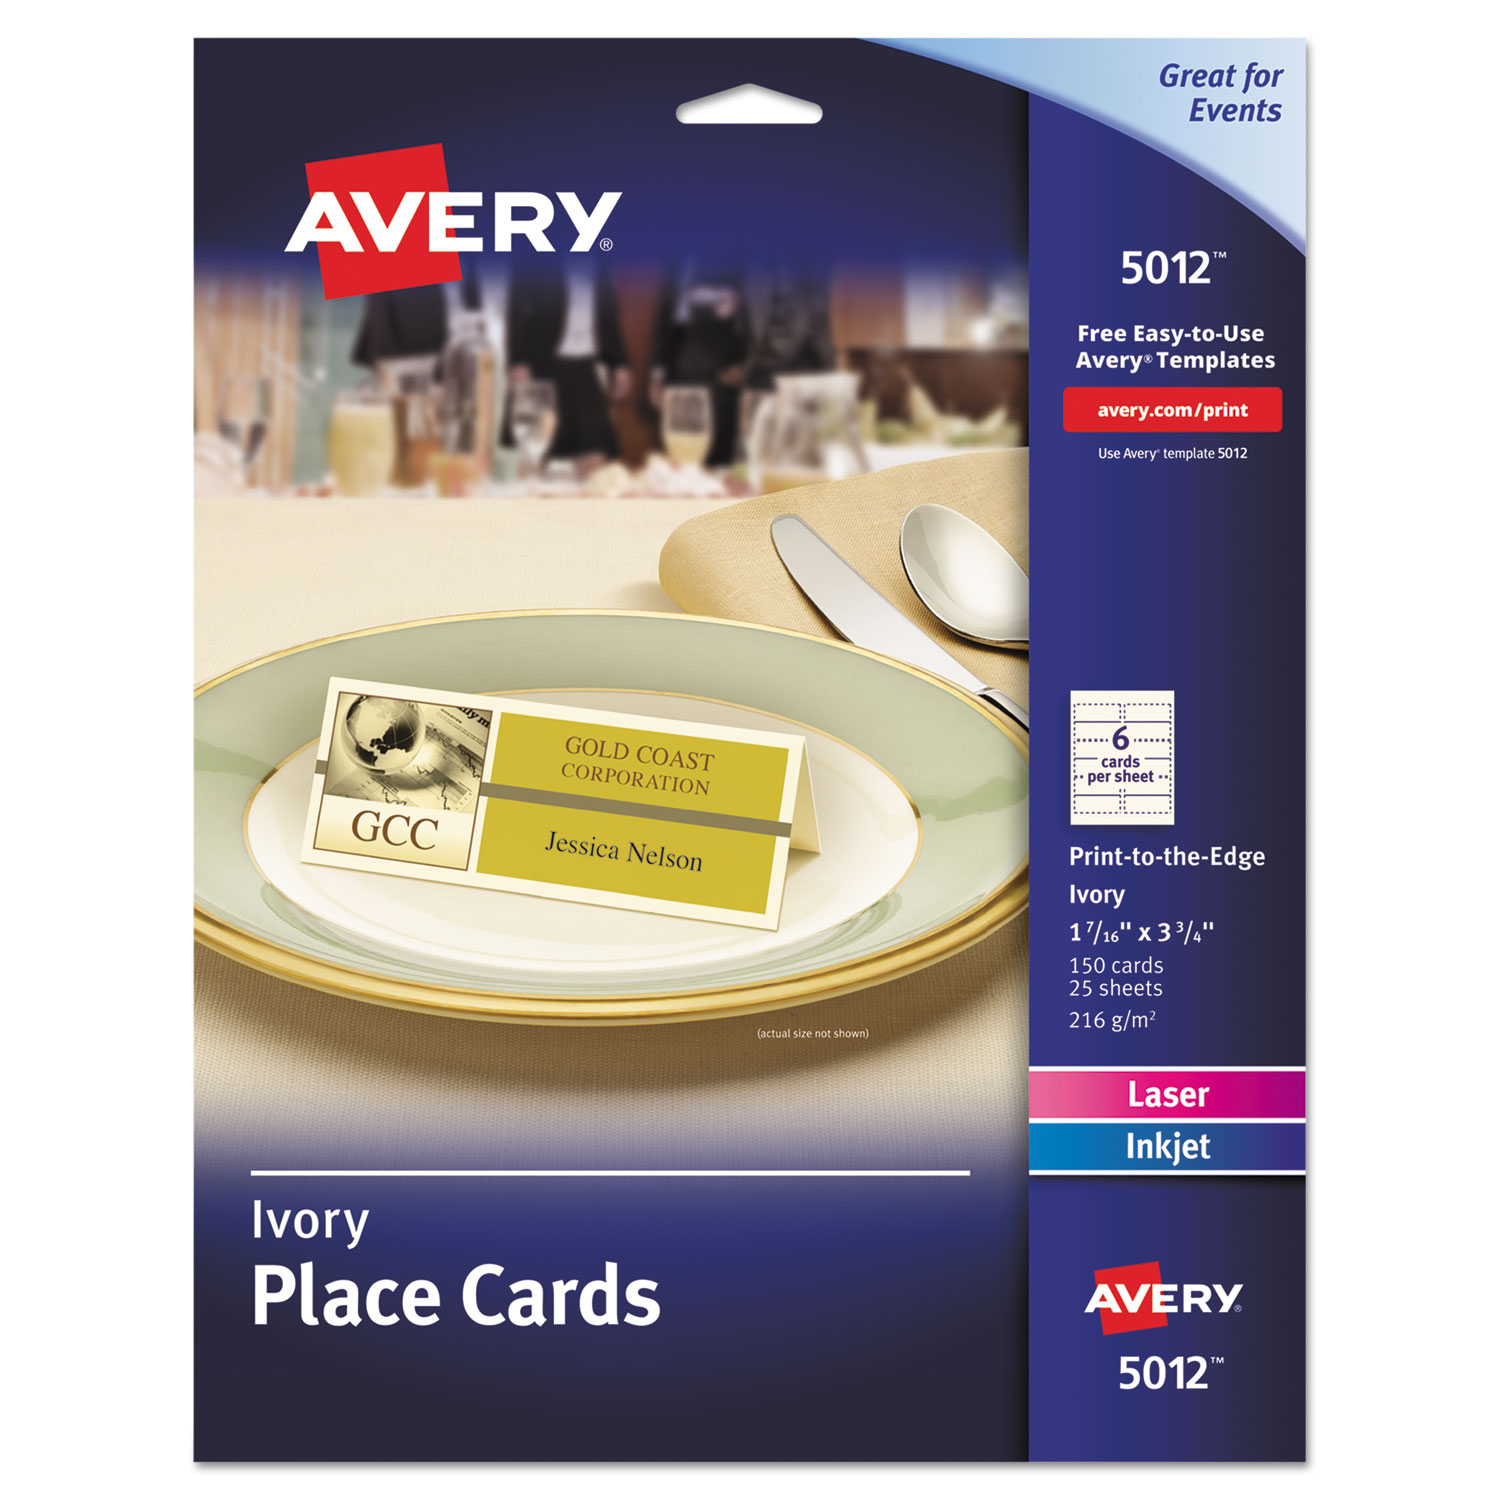  Avery 05012 Small Textured Tent Cards, Ivory, 1 7/16 x 3 3/4, 6 Cards/Sheet, 150/Box (AVE5012) 